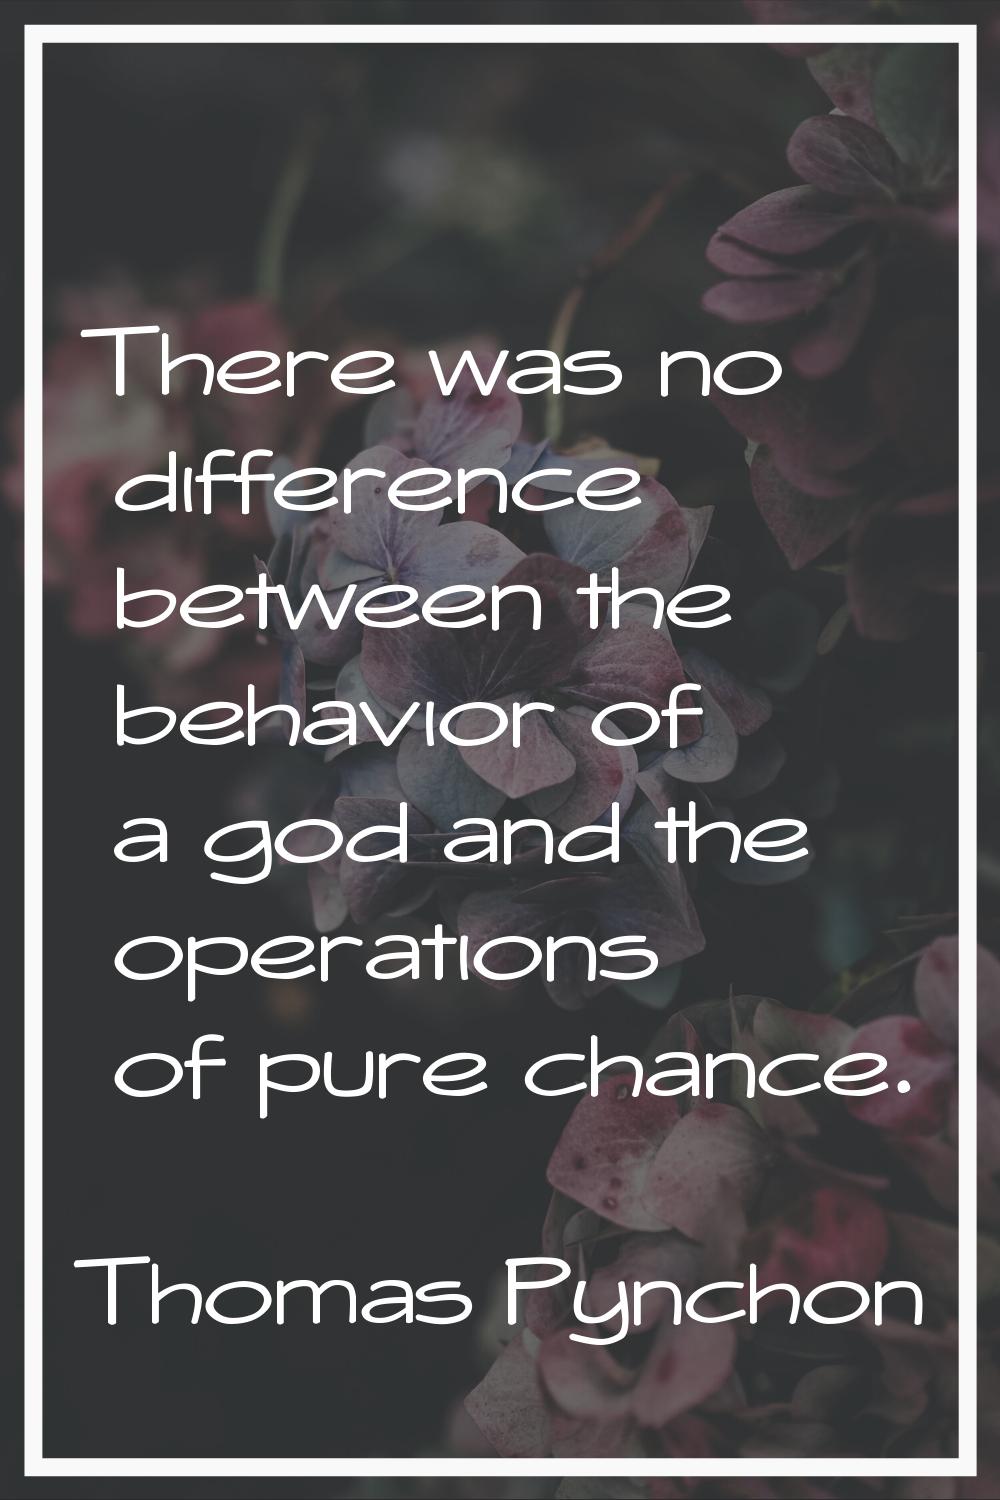 There was no difference between the behavior of a god and the operations of pure chance.